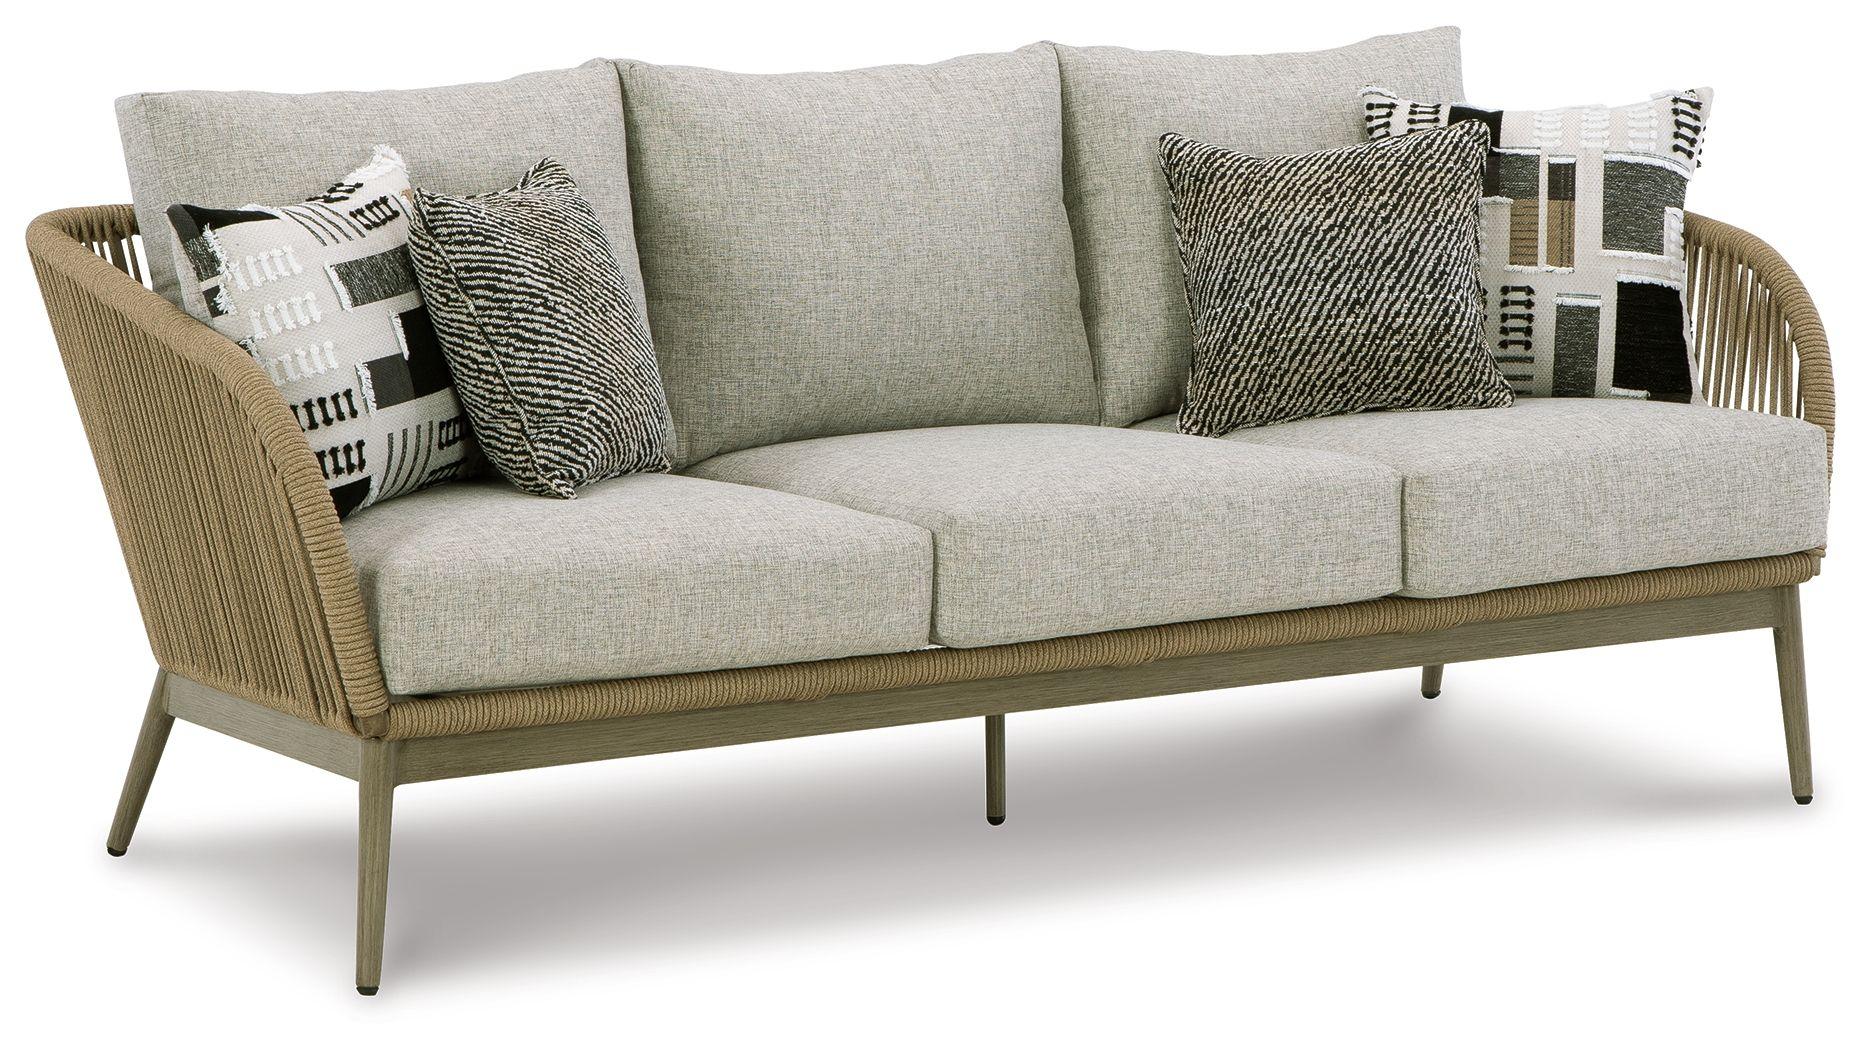 Signature Design by Ashley® - Swiss Valley - Beige - Sofa With Cushion - 5th Avenue Furniture